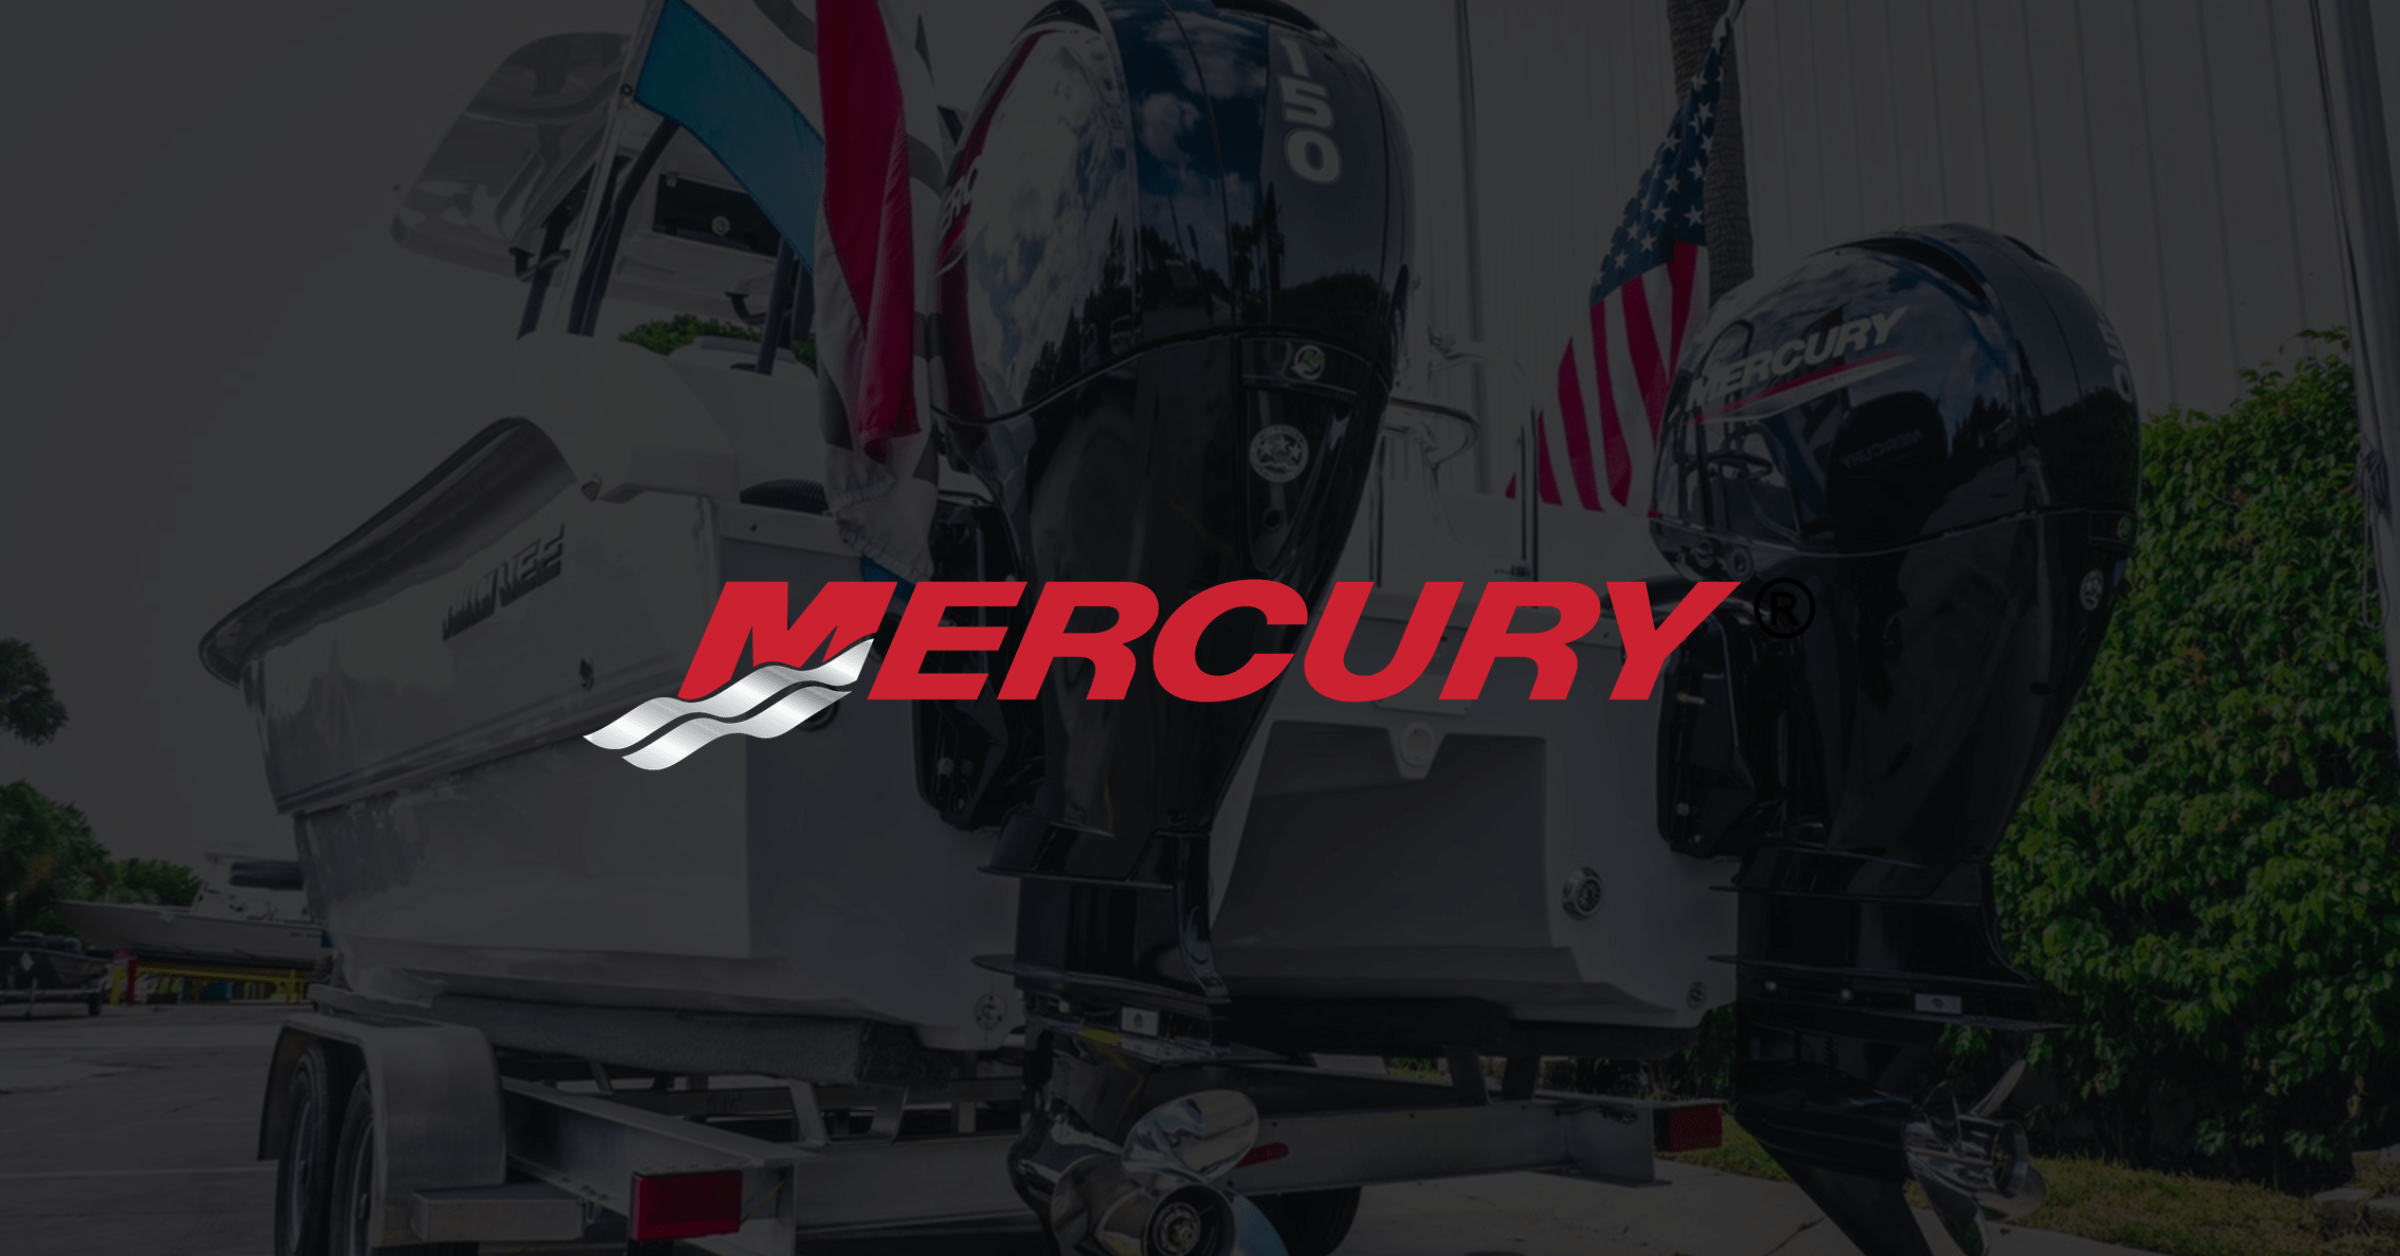 Jaw Dropping Prices For Mercury Outboard Service In Pompano Beach, Florida!